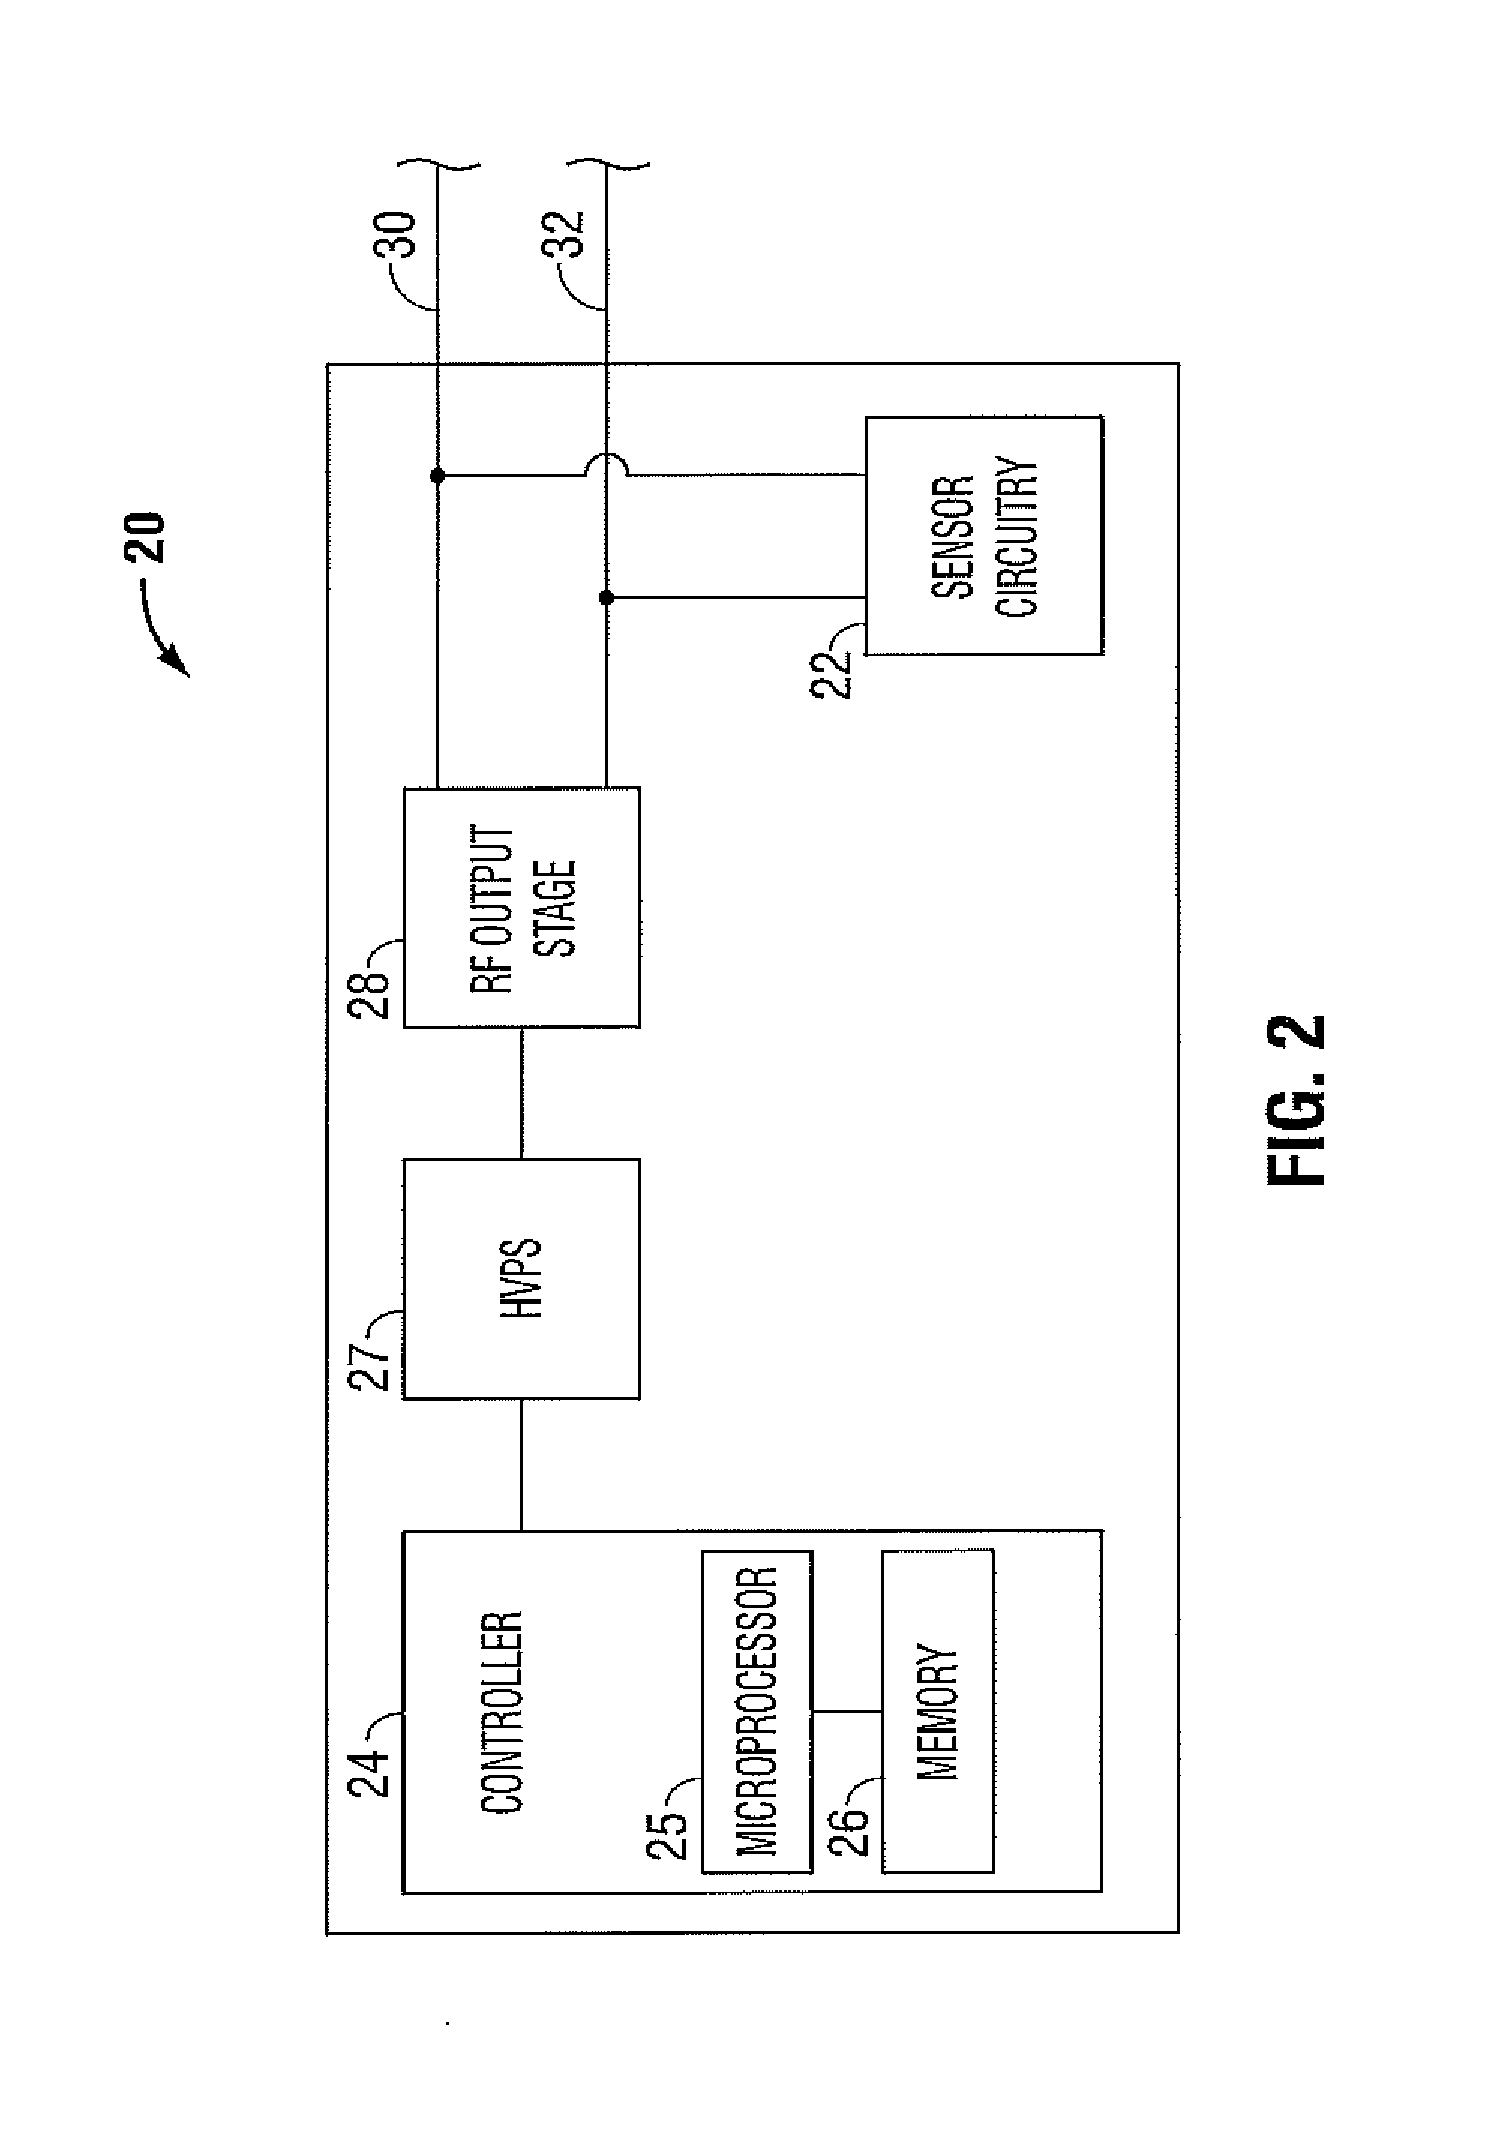 System and Method for Process Monitoring and Intelligent Shut-Off